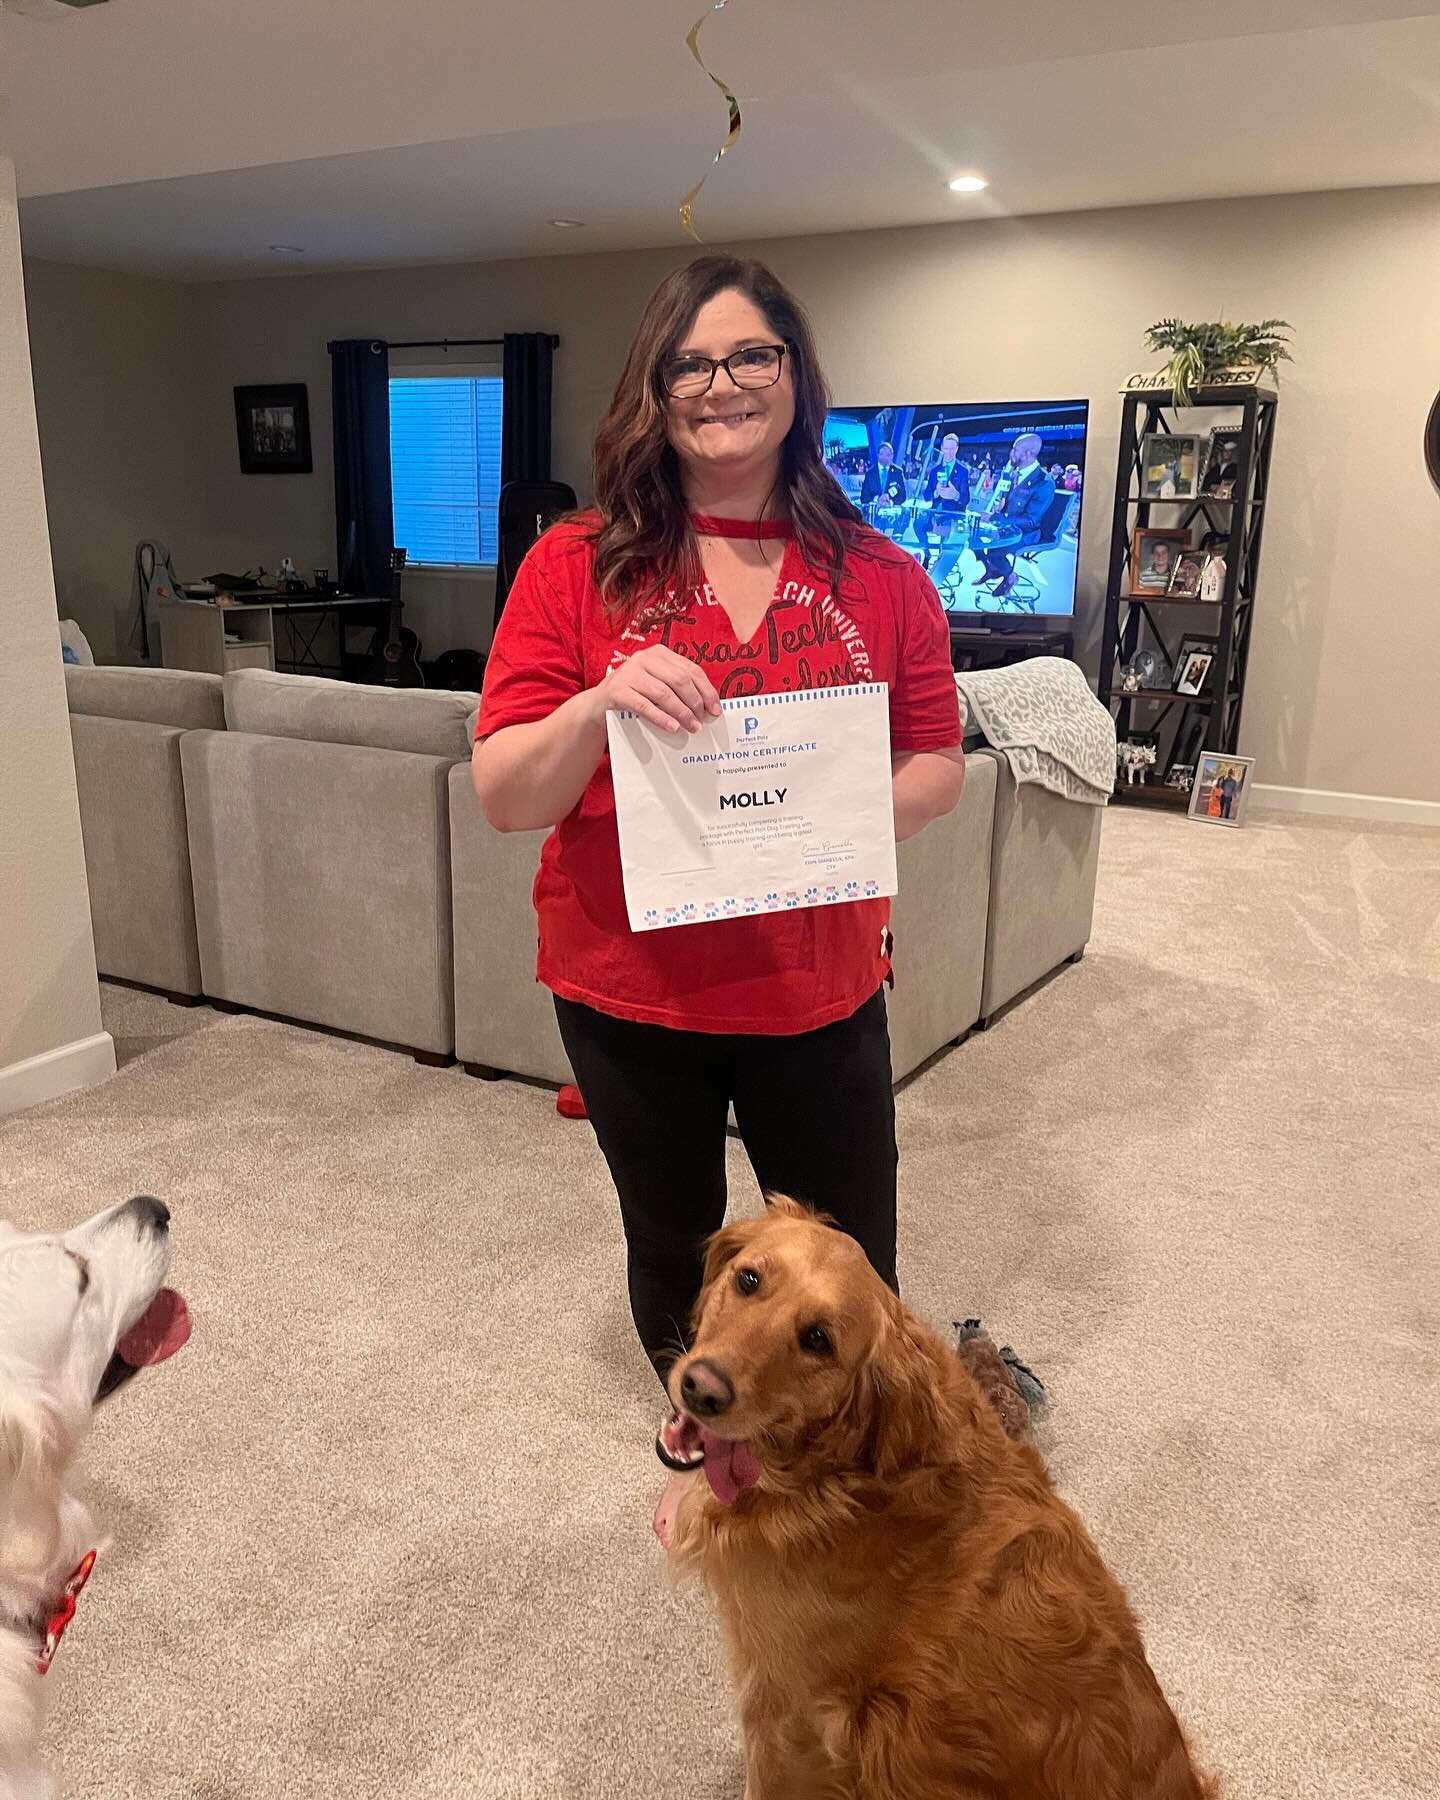 🥳Happy graduation Molly!! This one has been a long time coming! 

💻 We did virtual puppy training with Molly a few years ago! They just moved to the Denver area so we HAD to have a graduation celebration for her! 

😅 Alphie and Mike really had a &